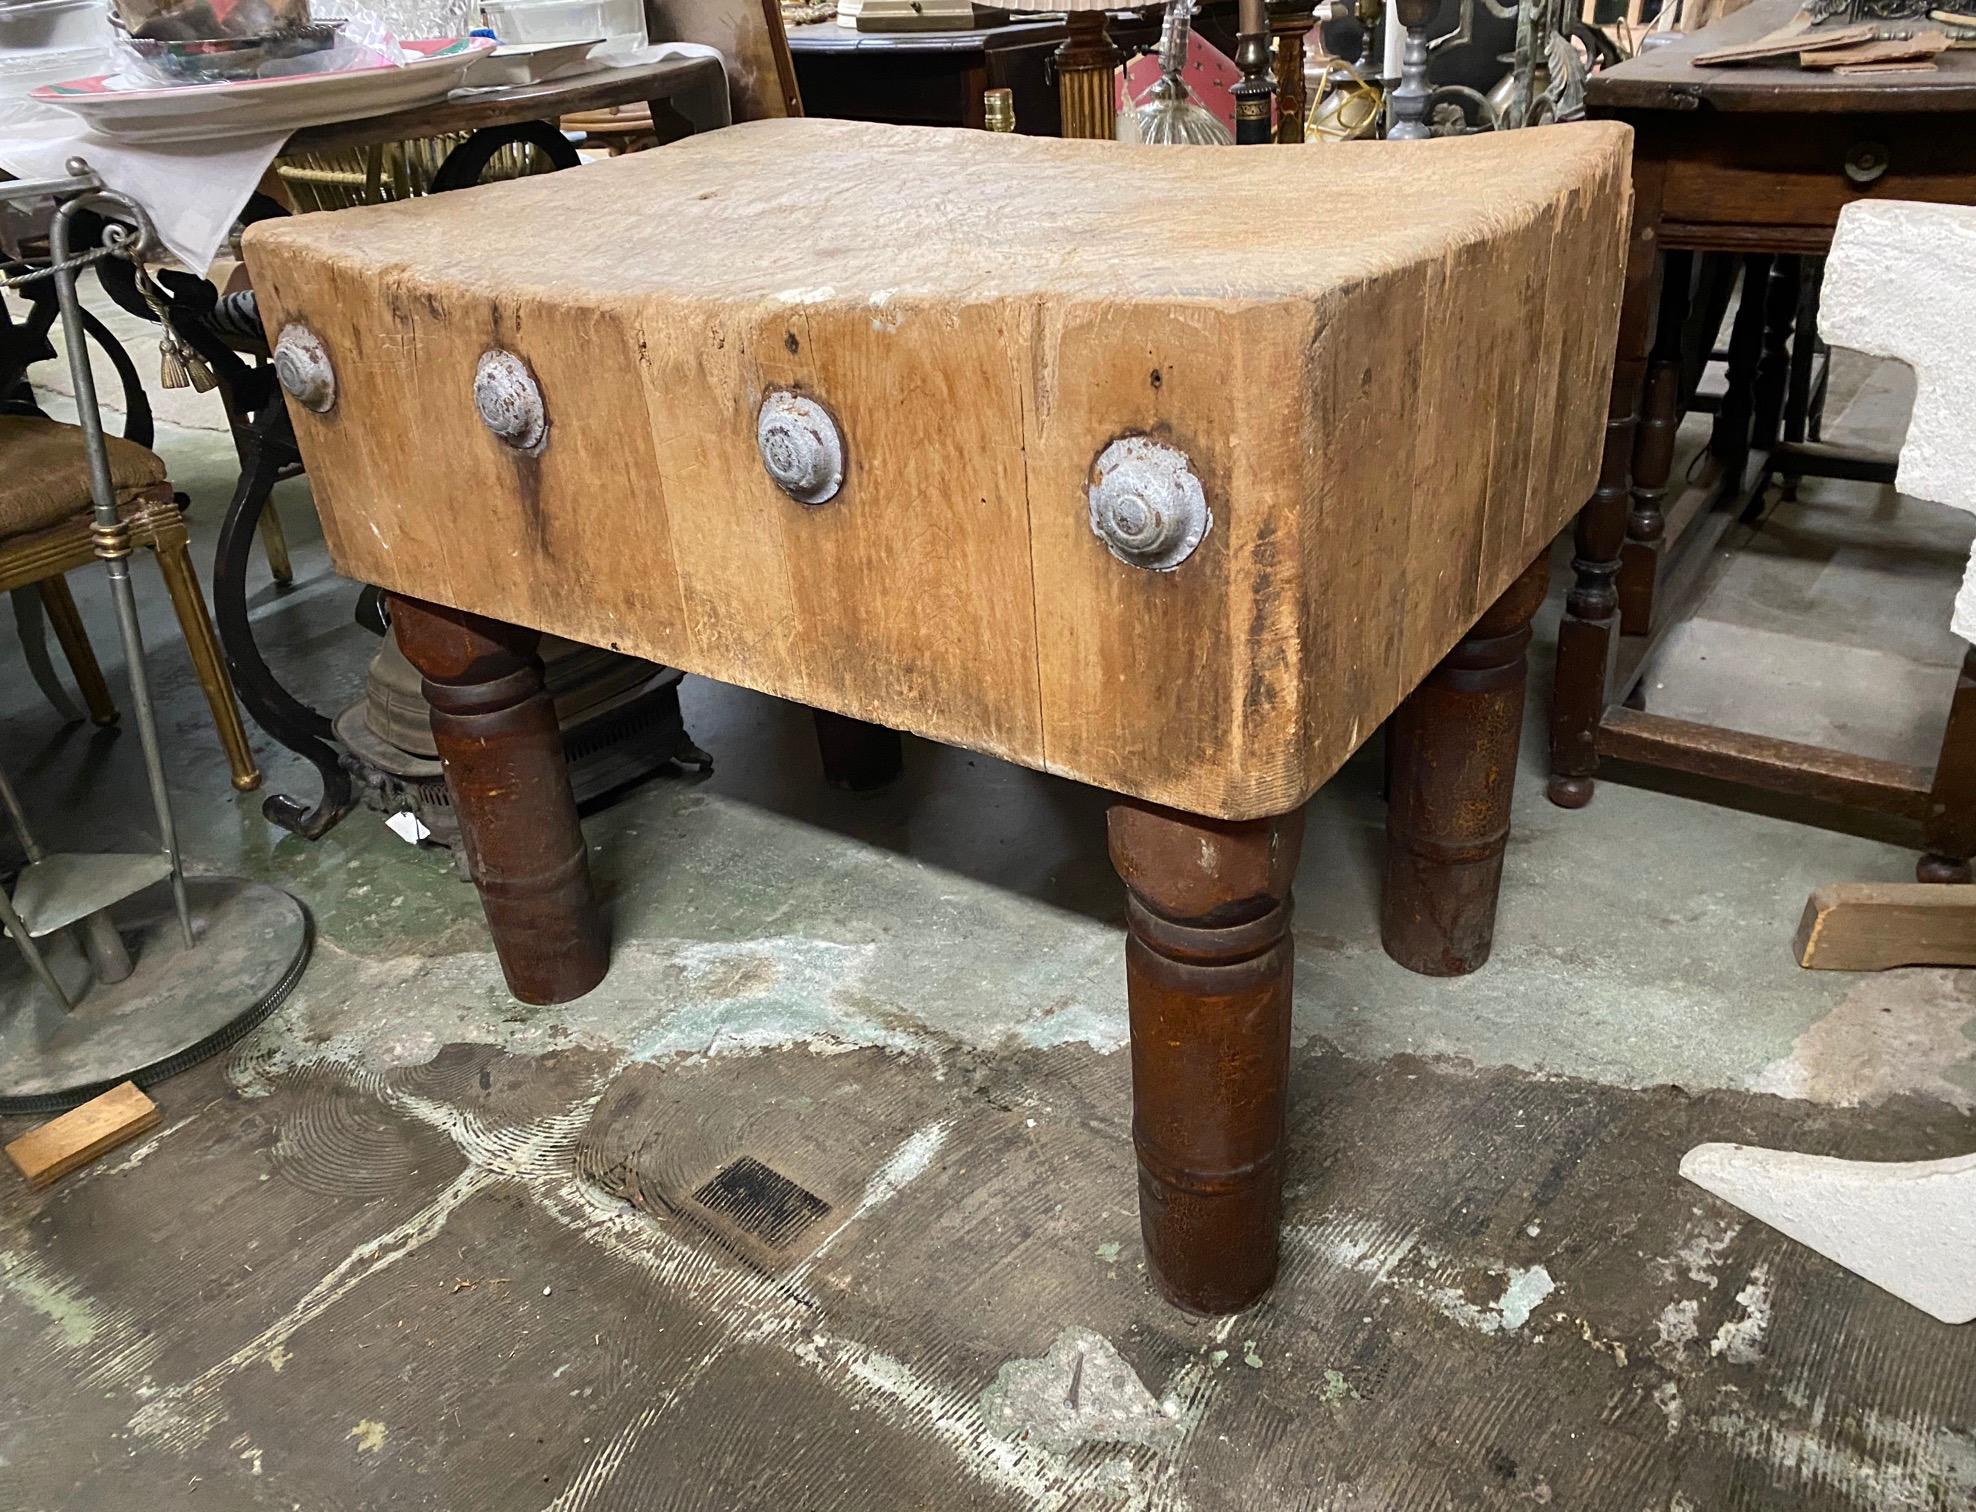 Early 20th century American maple butcher block table constructed of blocks, decorated with round zinc discs on one side, and with a wonderful patina. The block rests on four turned pine legs with of their original red paint. Table still functions